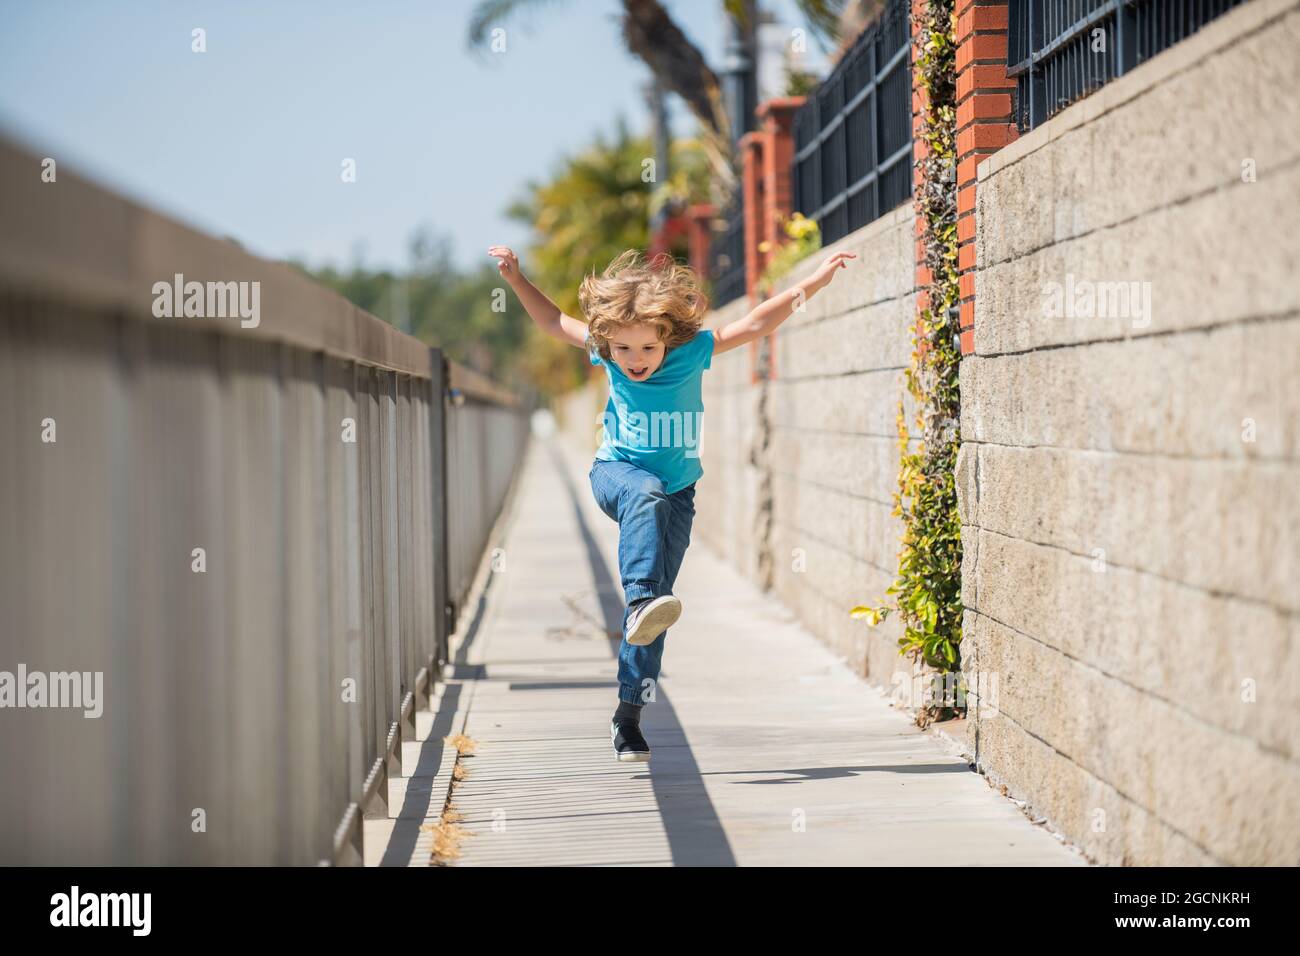 When living an active life be happy and energetic. Energetic kid run on promenade. Fun childhood Stock Photo